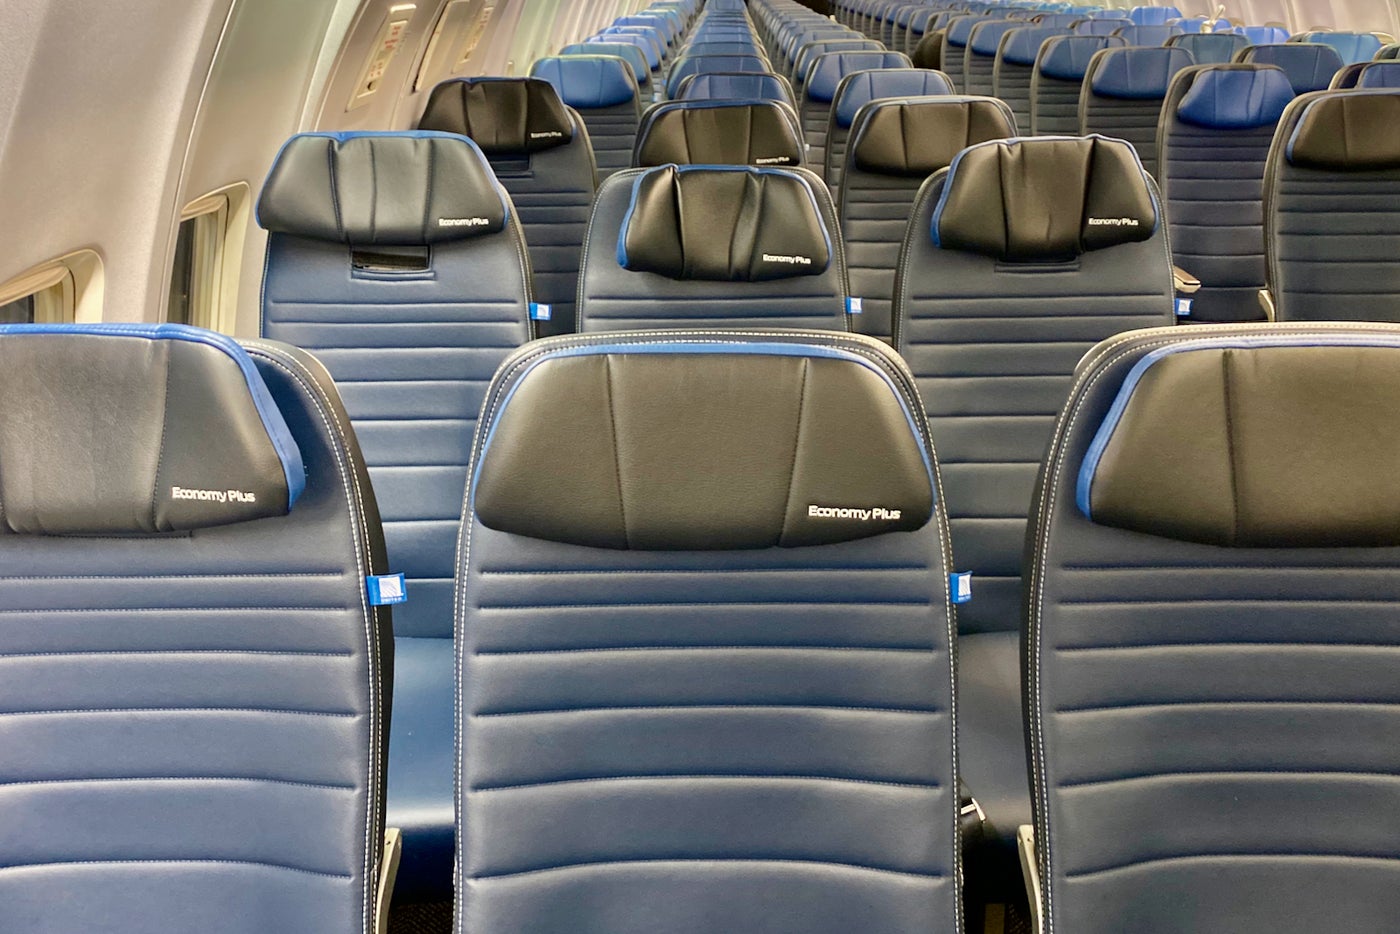 The refreshed 757 offers the best economy seats in United's fleet